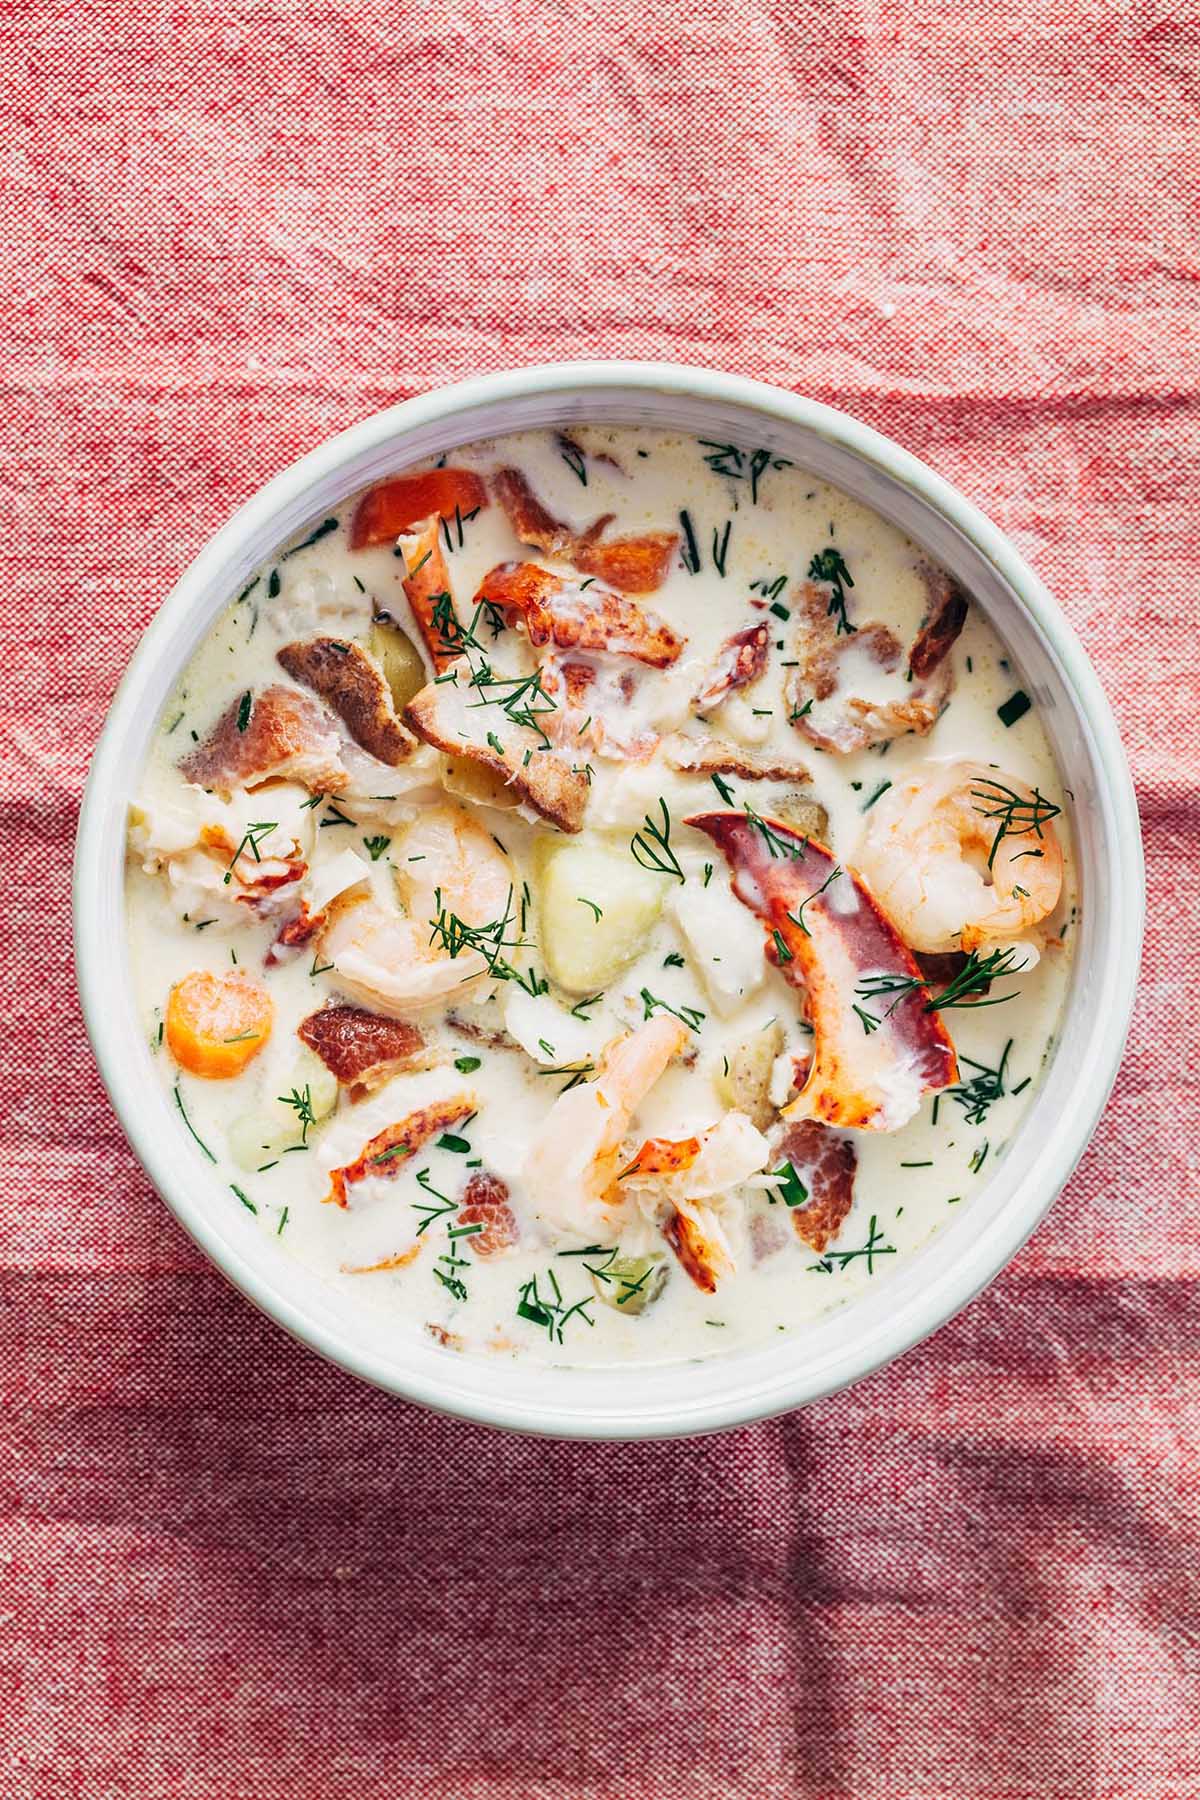 Overhead shot of a bowl of nova Scotia seafood chowder loaded with lobster, haddock, shrimp, potatoes, and bacon, with chopped dill and chives on a red fabric background.